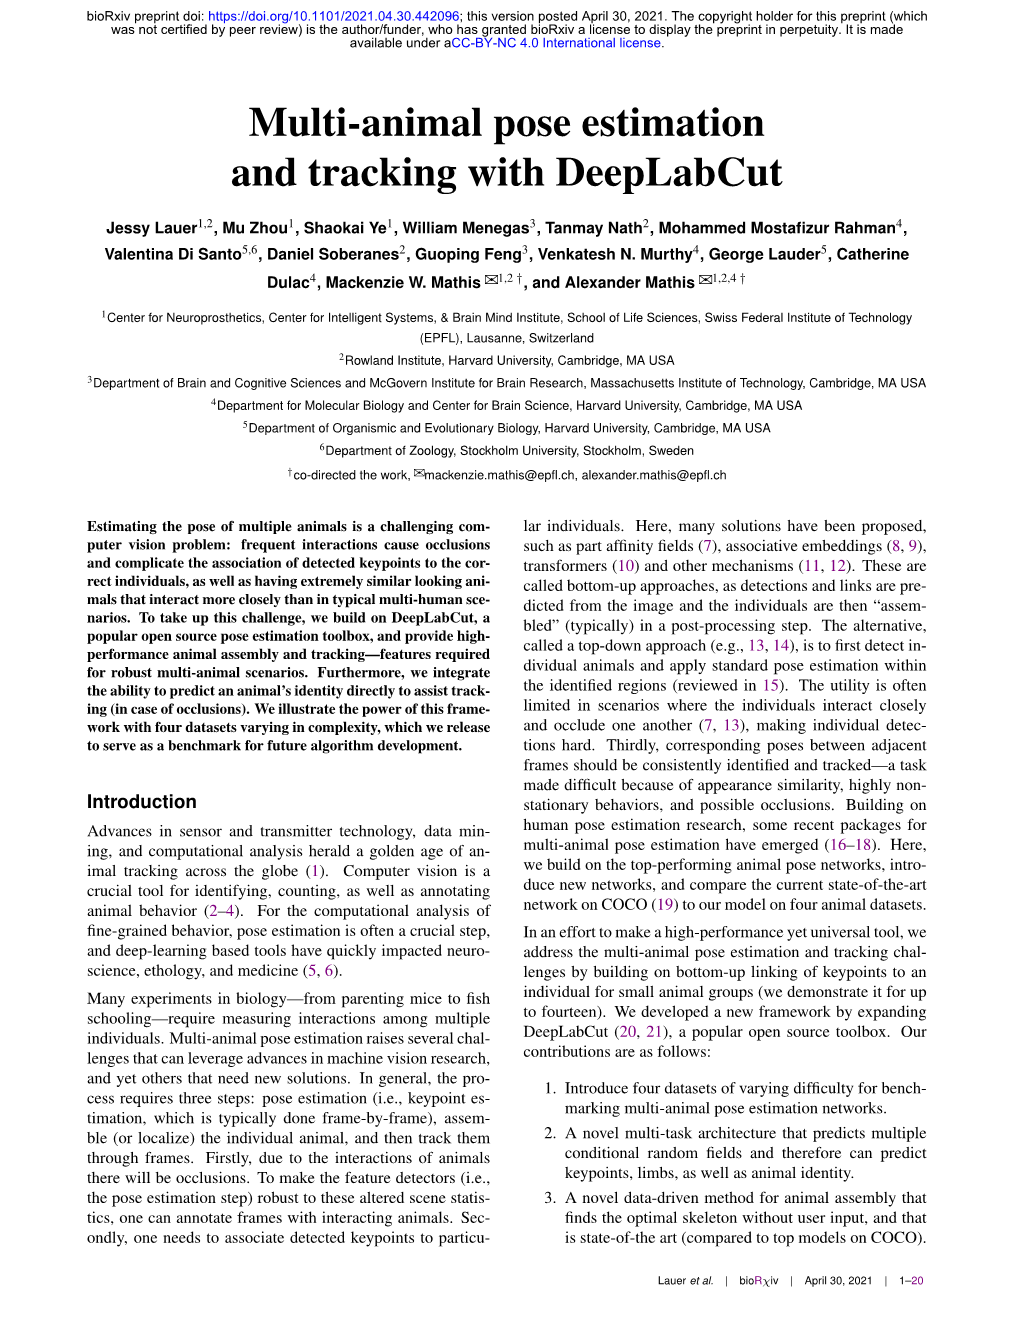 Multi-Animal Pose Estimation and Tracking with Deeplabcut